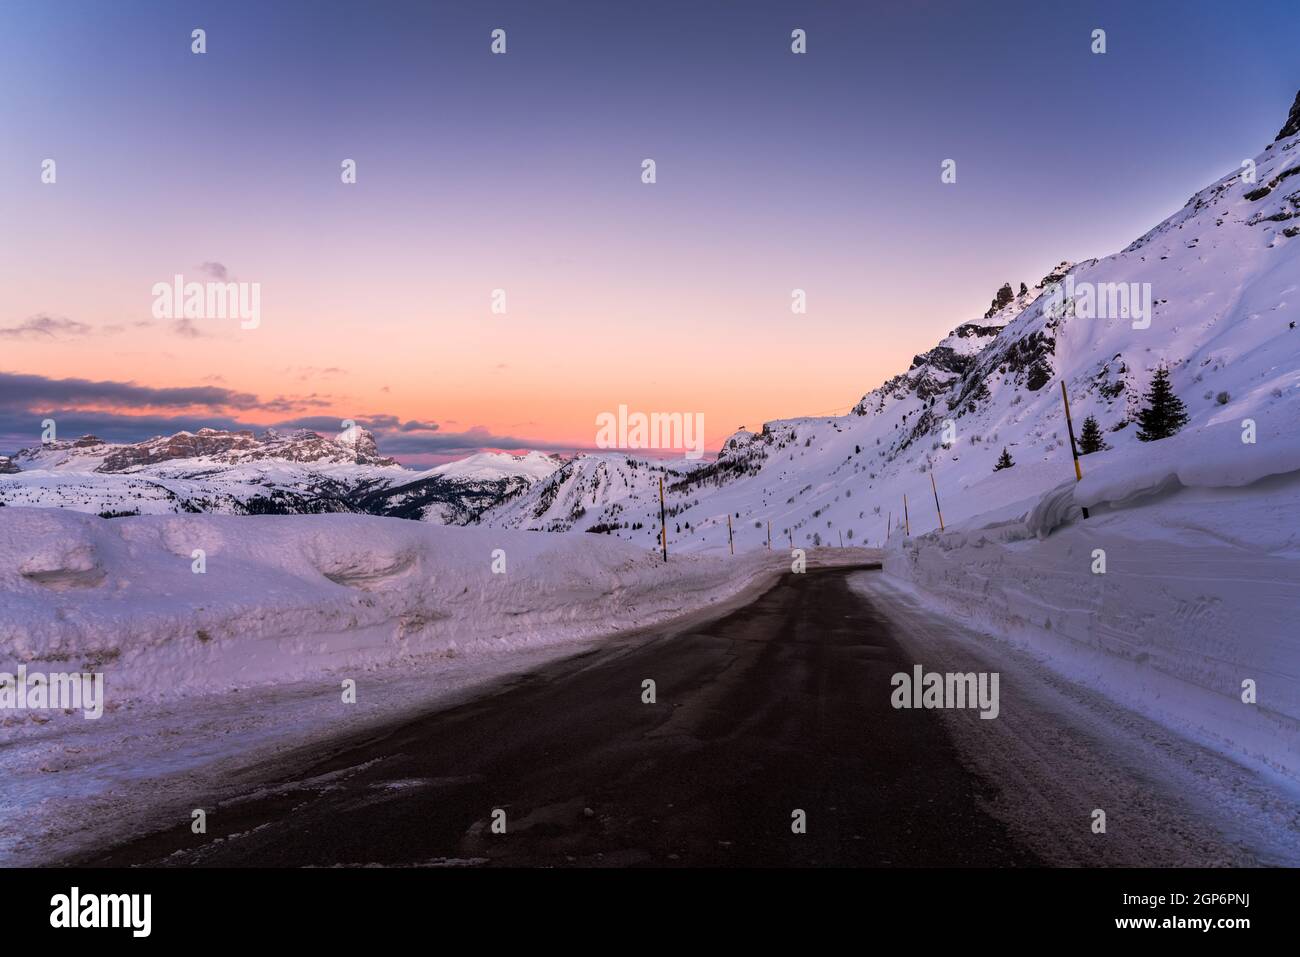 High altitude alpine road cleared of snow at dusk in winter Stock Photo